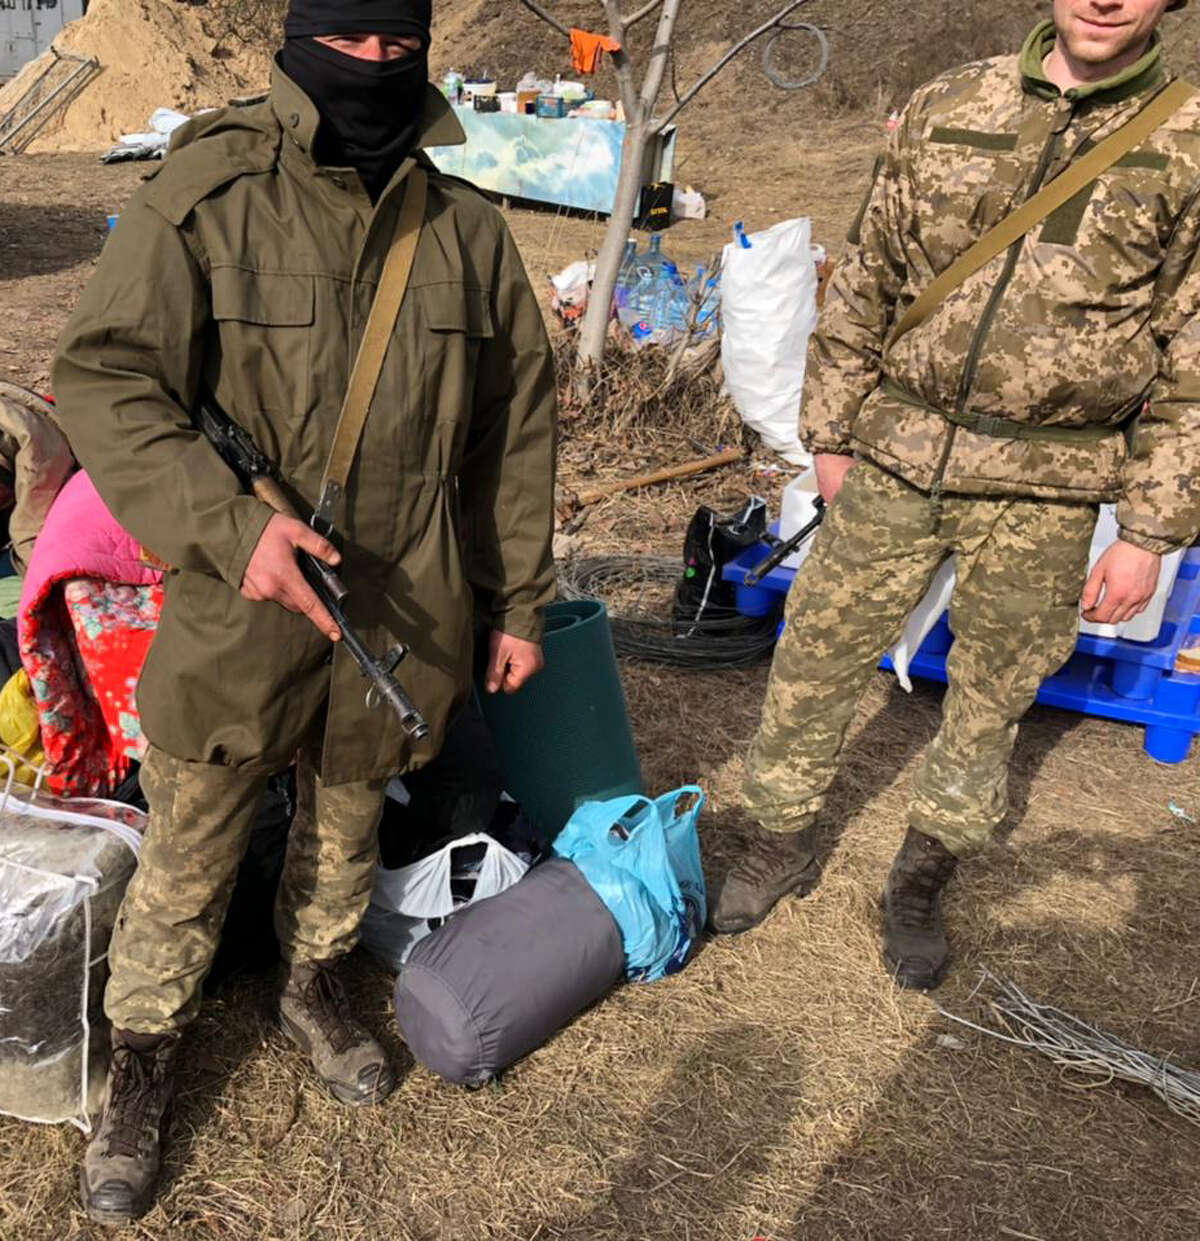 Volunteer fighters for Ukraine's Territorial Defence Forces pose with supplies donated by community members in the days after Russia's invasion of Ukraine on Feb. 24, 2022.